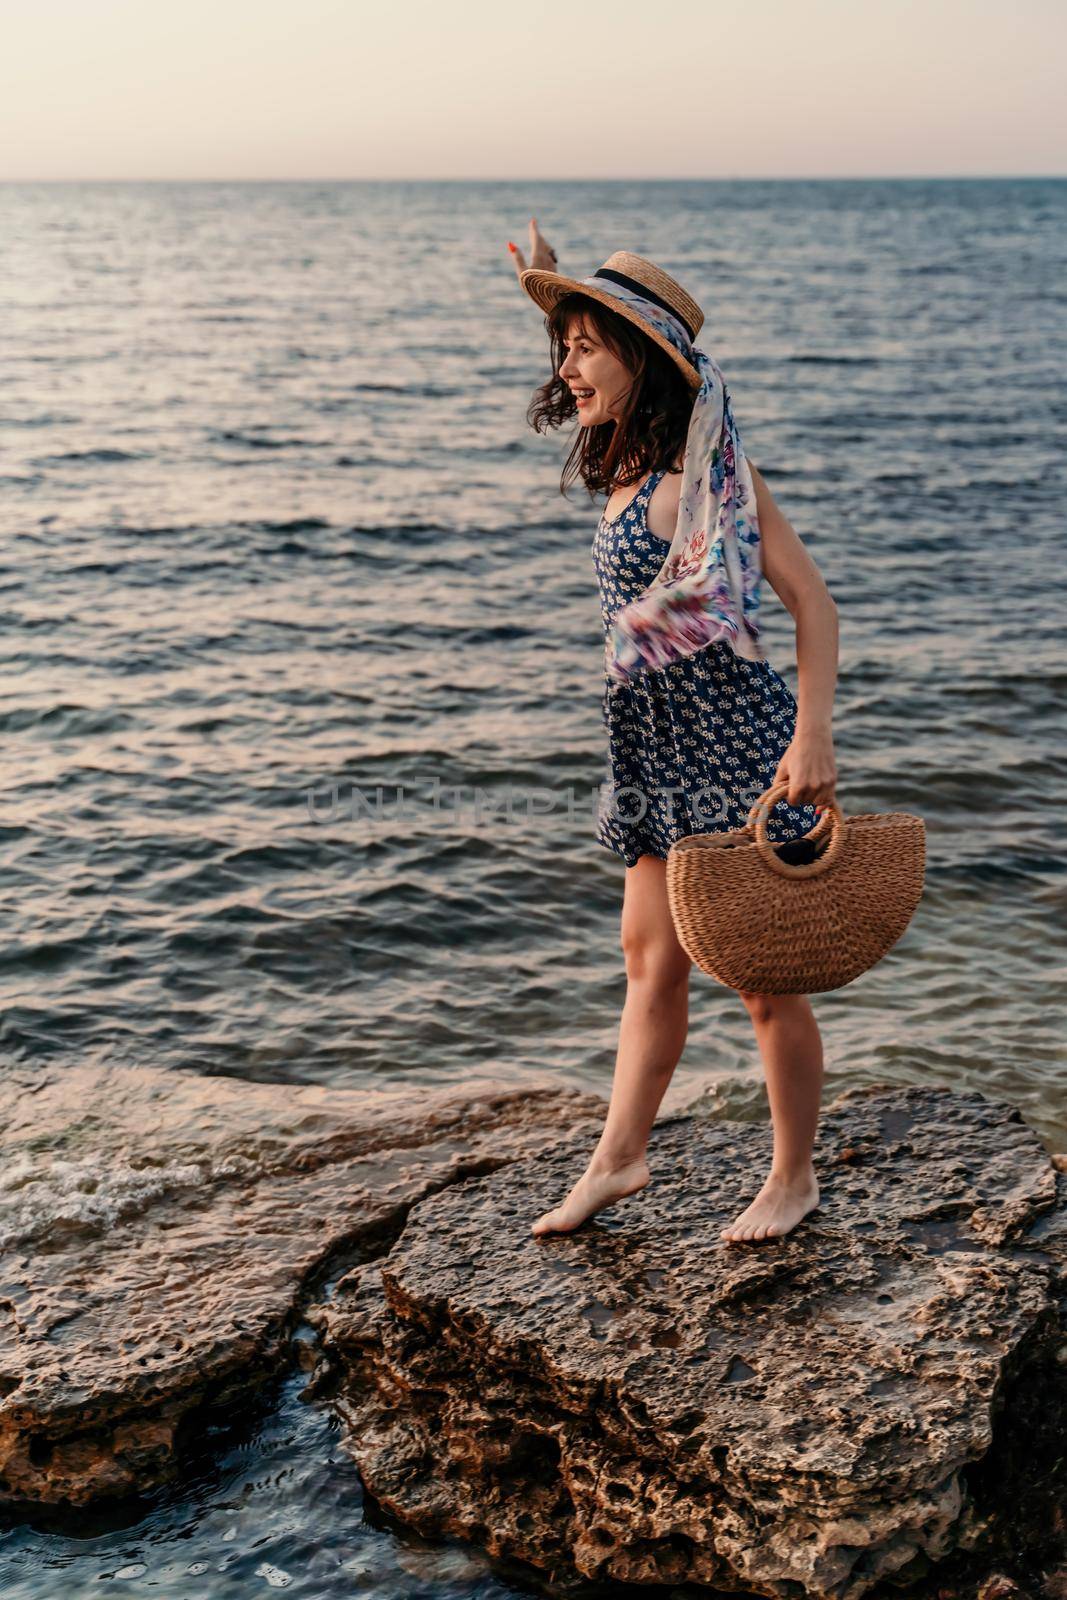 A woman in a dress, hat and with a straw bag is standing on the beach enjoying the sea. Happy summer holidays.